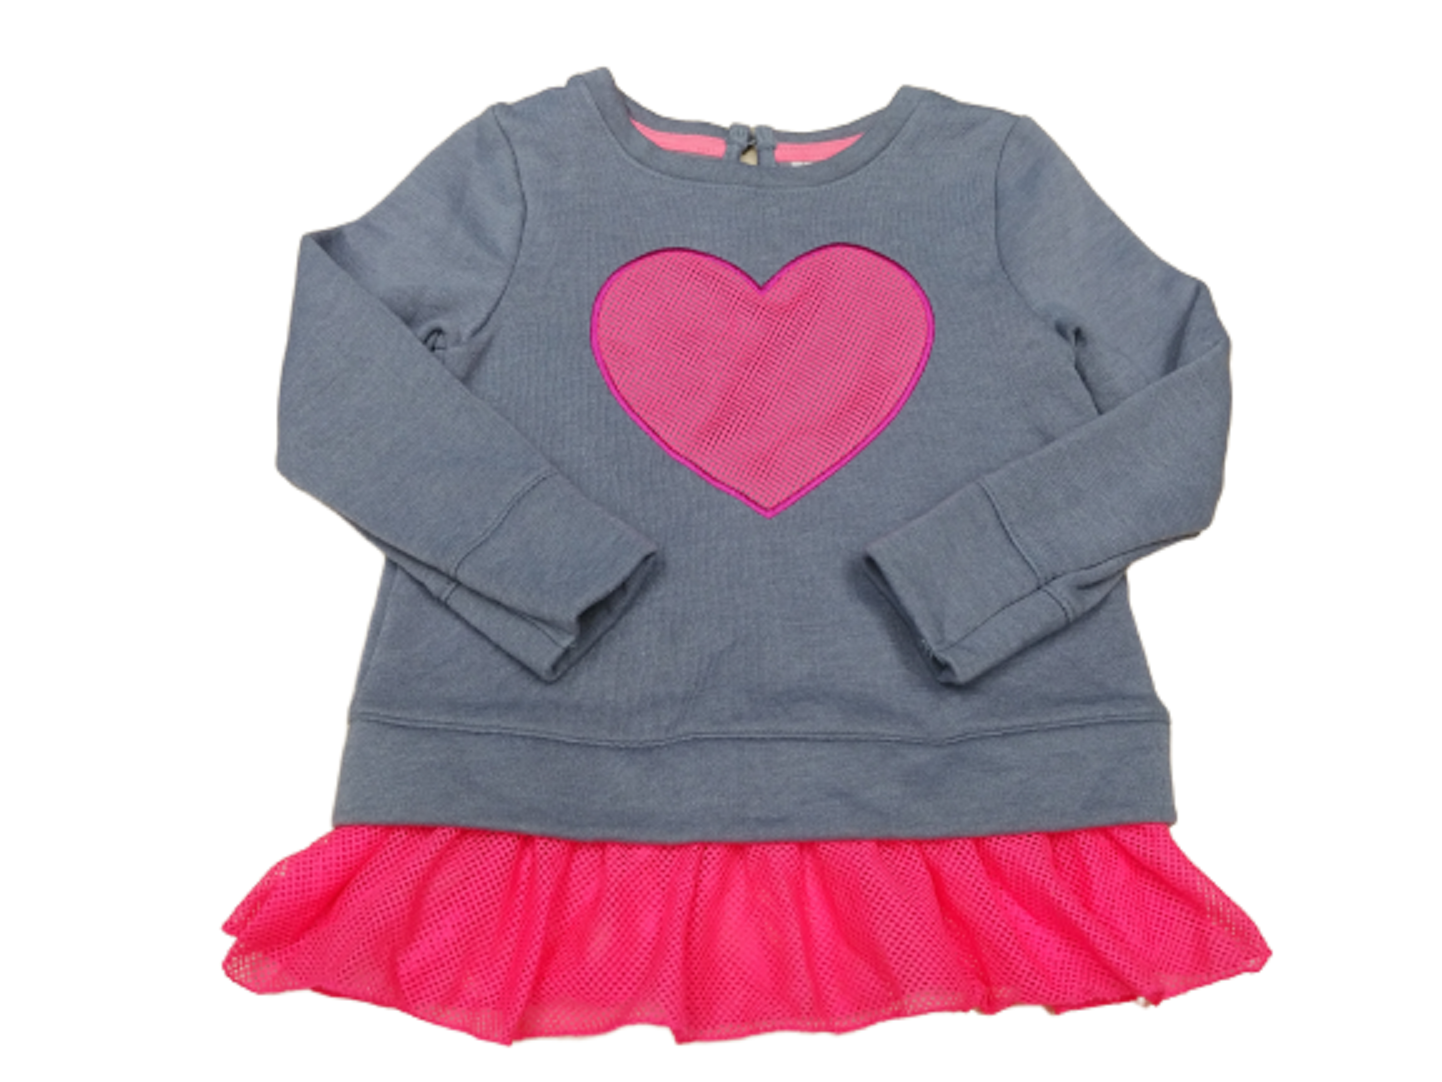 Cat & Jack Girl's Pink/Gray Skirted Top Pink Heart Size 18 Months